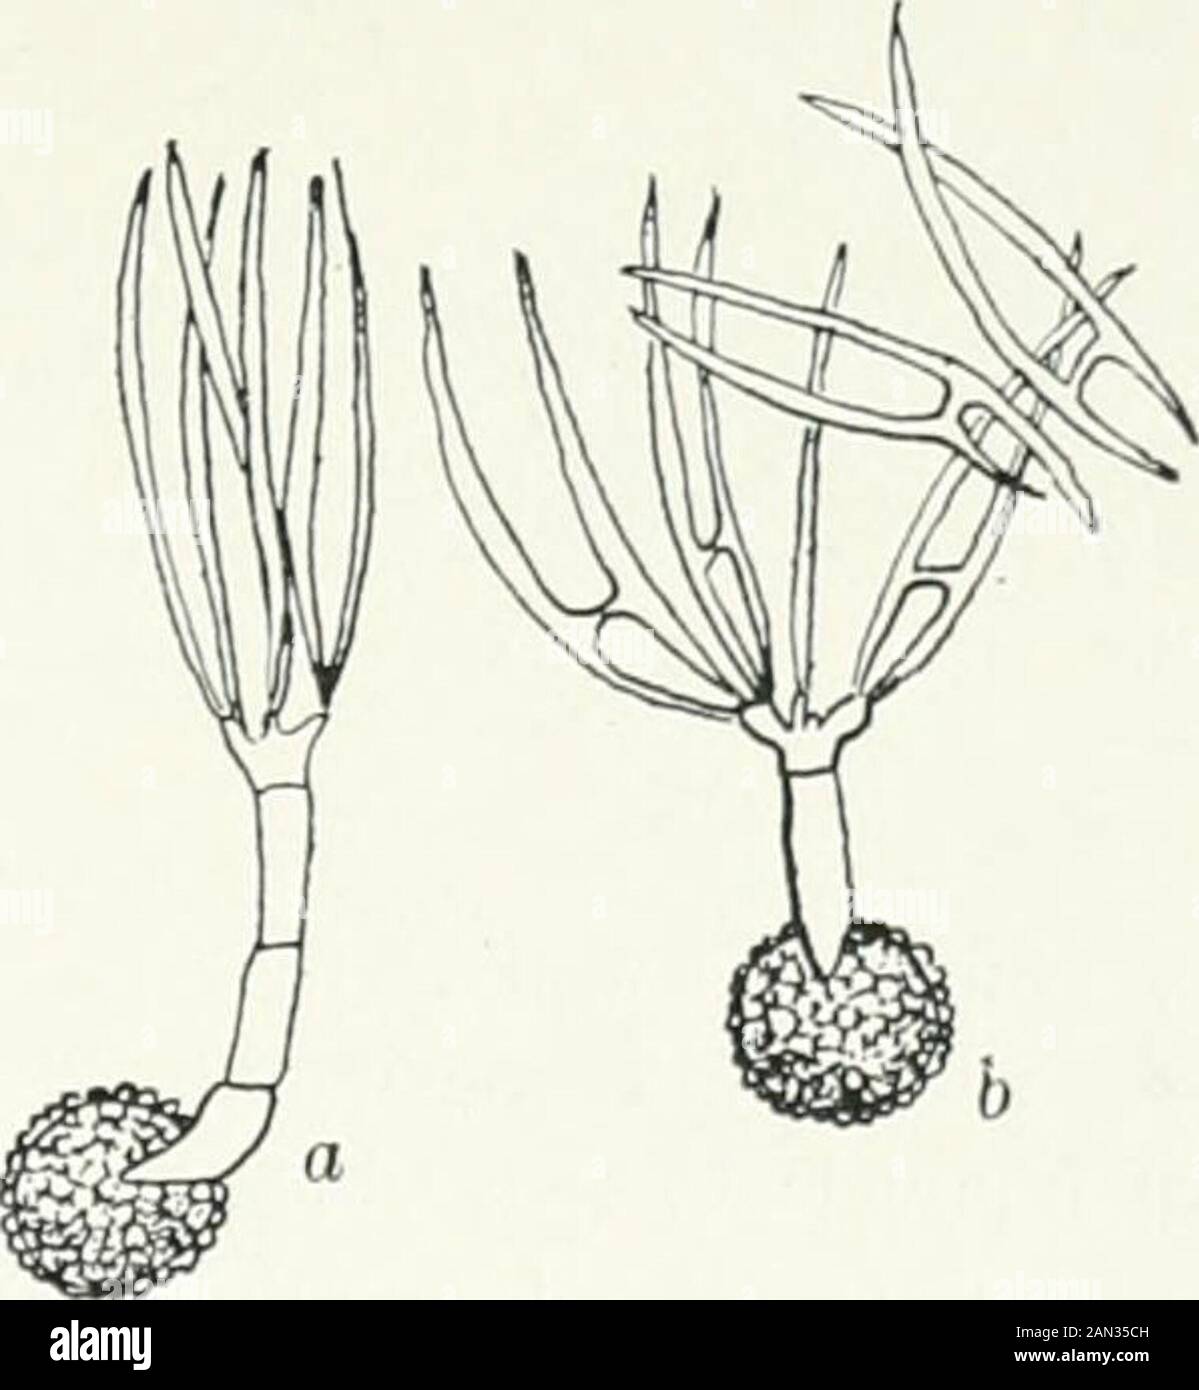 Fungi, Ascomycetes, Ustilaginales, Uredinales . -spore of T. Tritici the nucleus passesinto the basidium and divides three times so that eight nuclei are formed.Eight basidiospores are budded off in abunch at the apex of the basidium, andeach receives a single nucleus. Frequentlyadditional nuclear divisions take placeand ten, twelve, or sixteen uninucleatespores may be produced. When the sporesare fully formed short conjugating tubesgrow out and connect neighbouringspi nes, often while these are still attachedto the basidium (fig. 161). According to Rawitschcr the nucleusof one cell of the pai Stock Photo